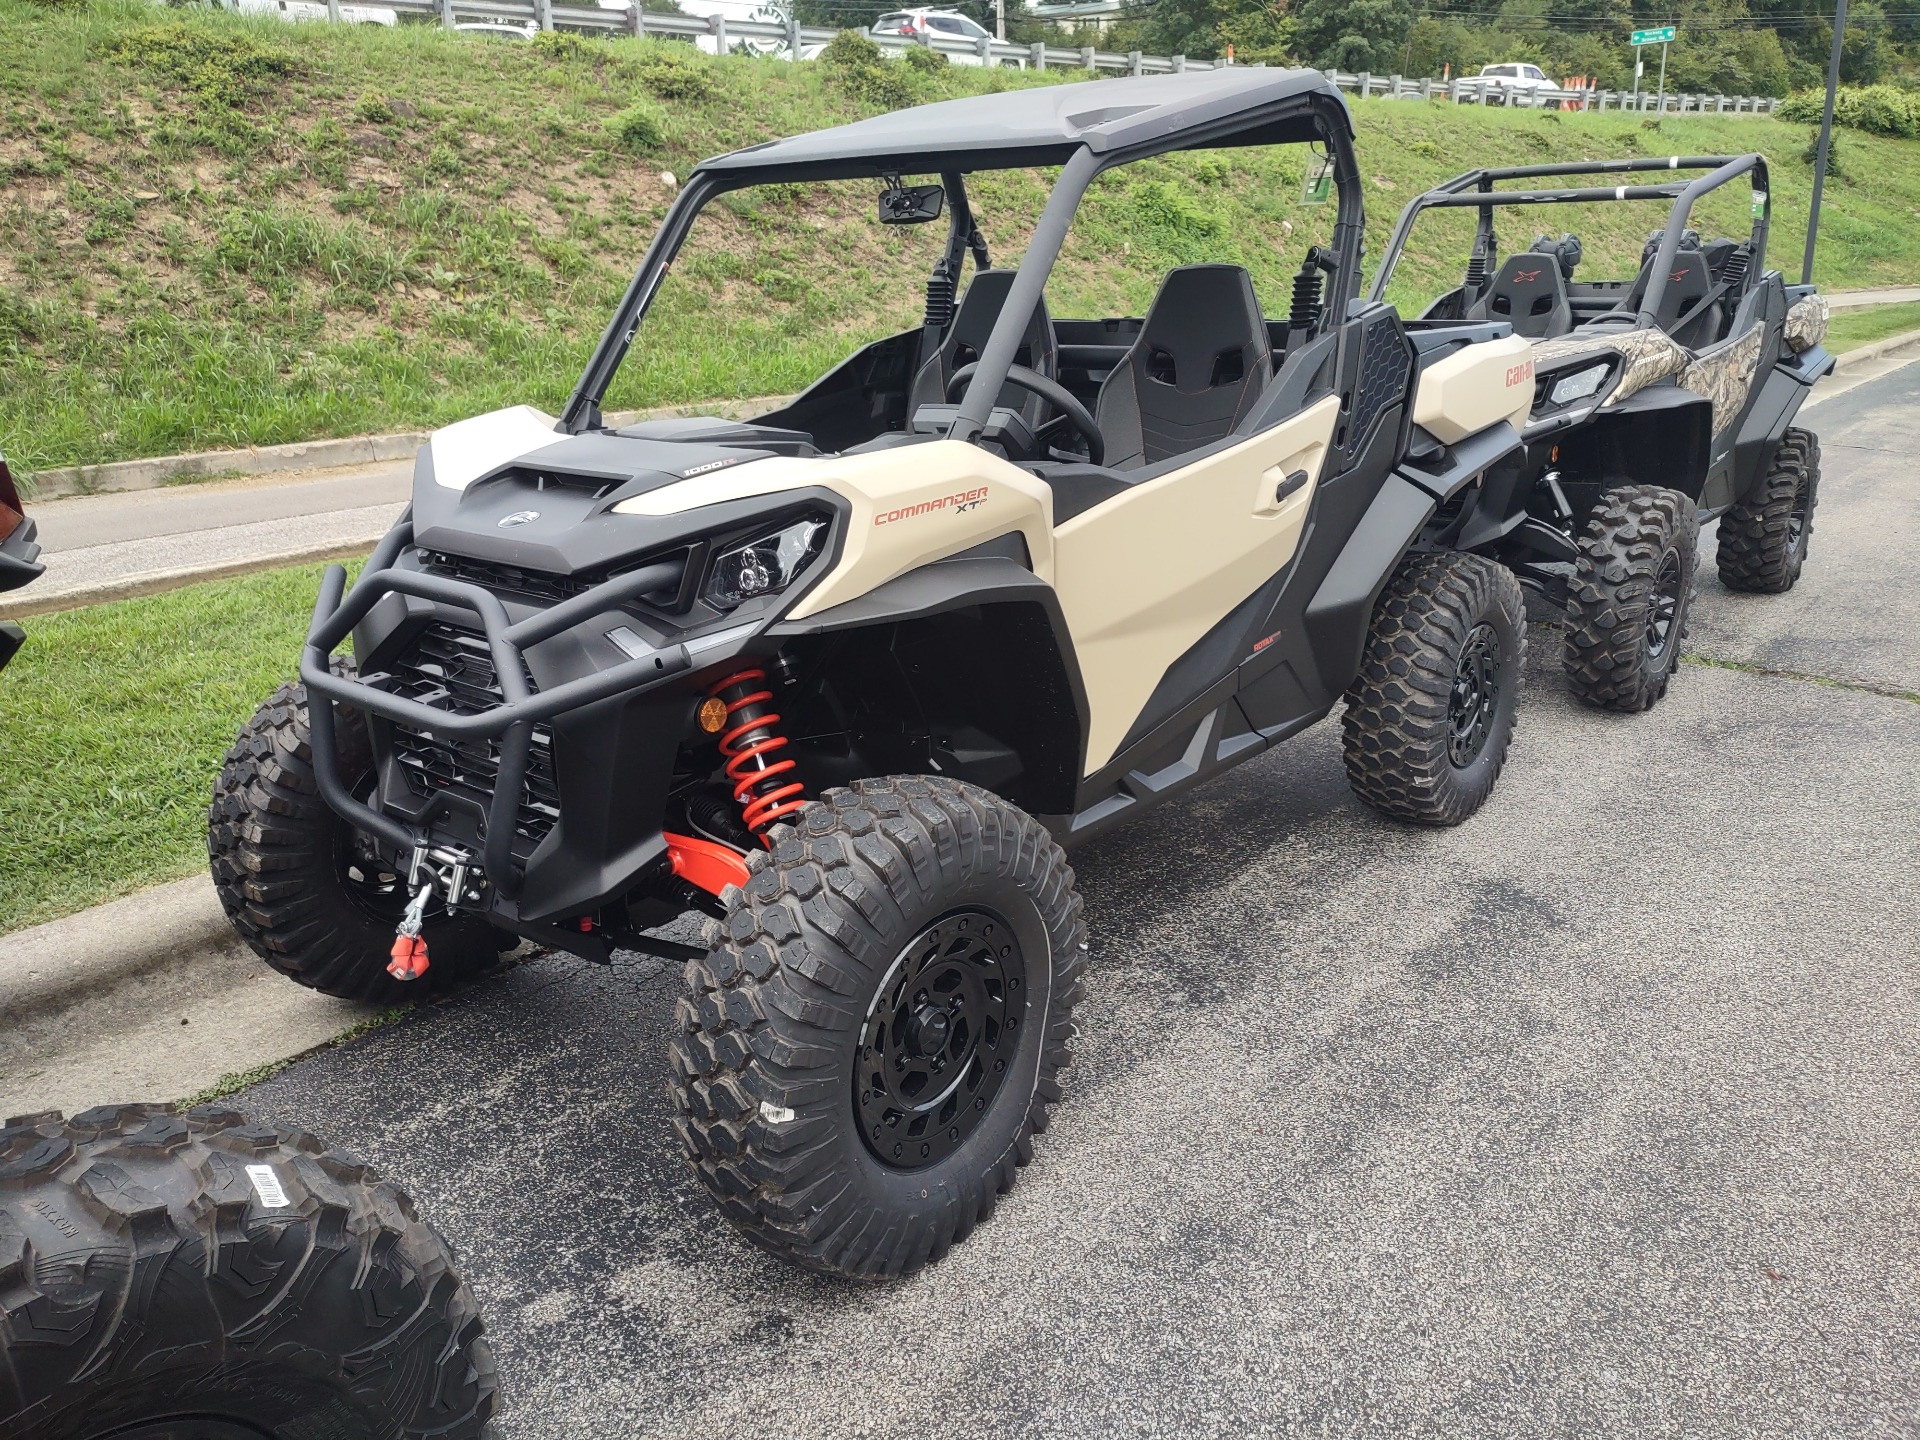 2023 Can-Am Commander XT-P 1000R in Barboursville, West Virginia - Photo 1